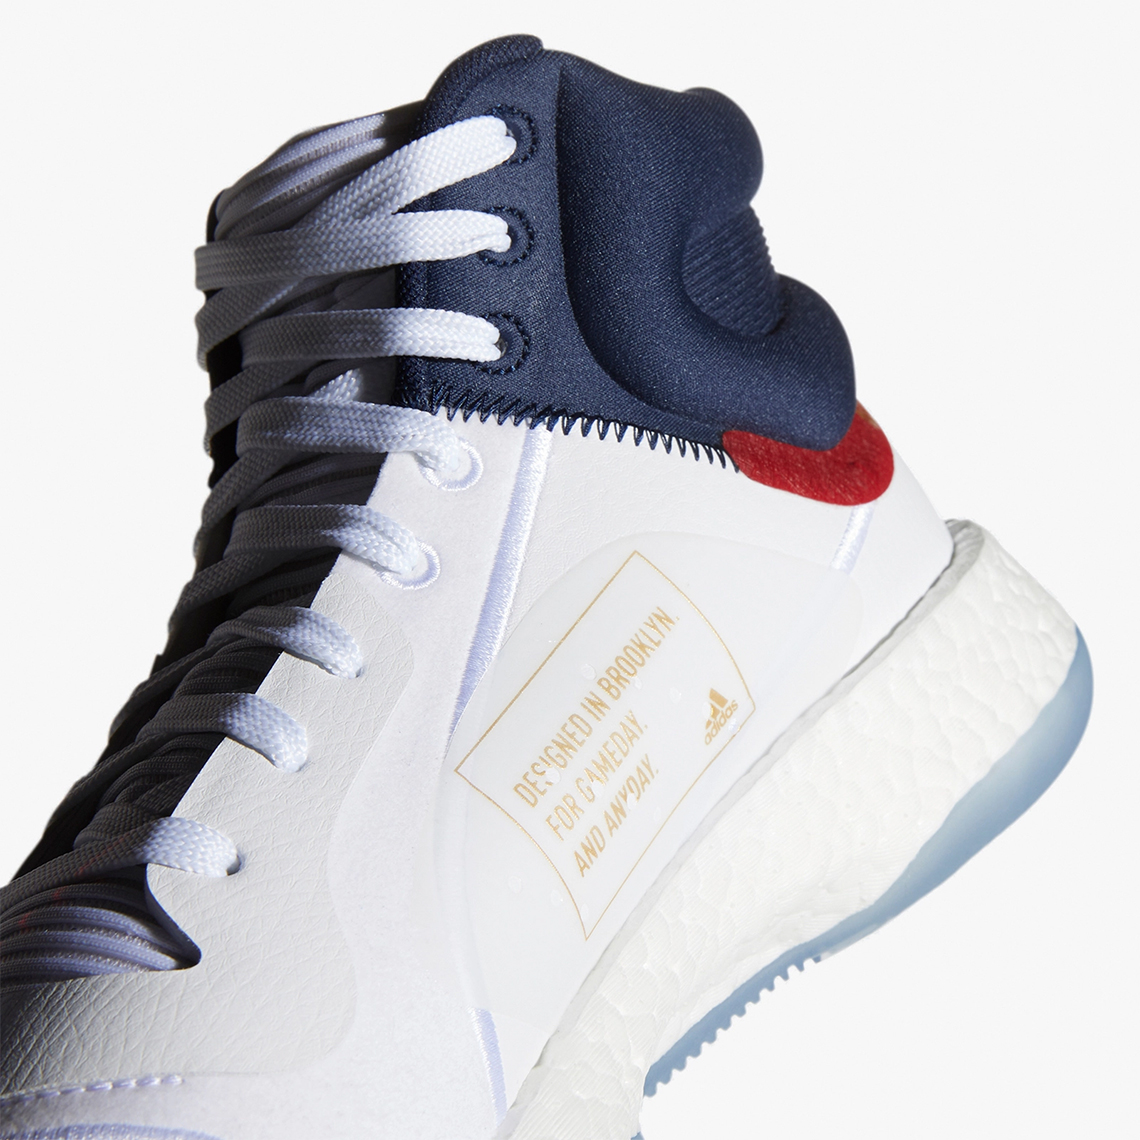 adidas marquee boost top ten